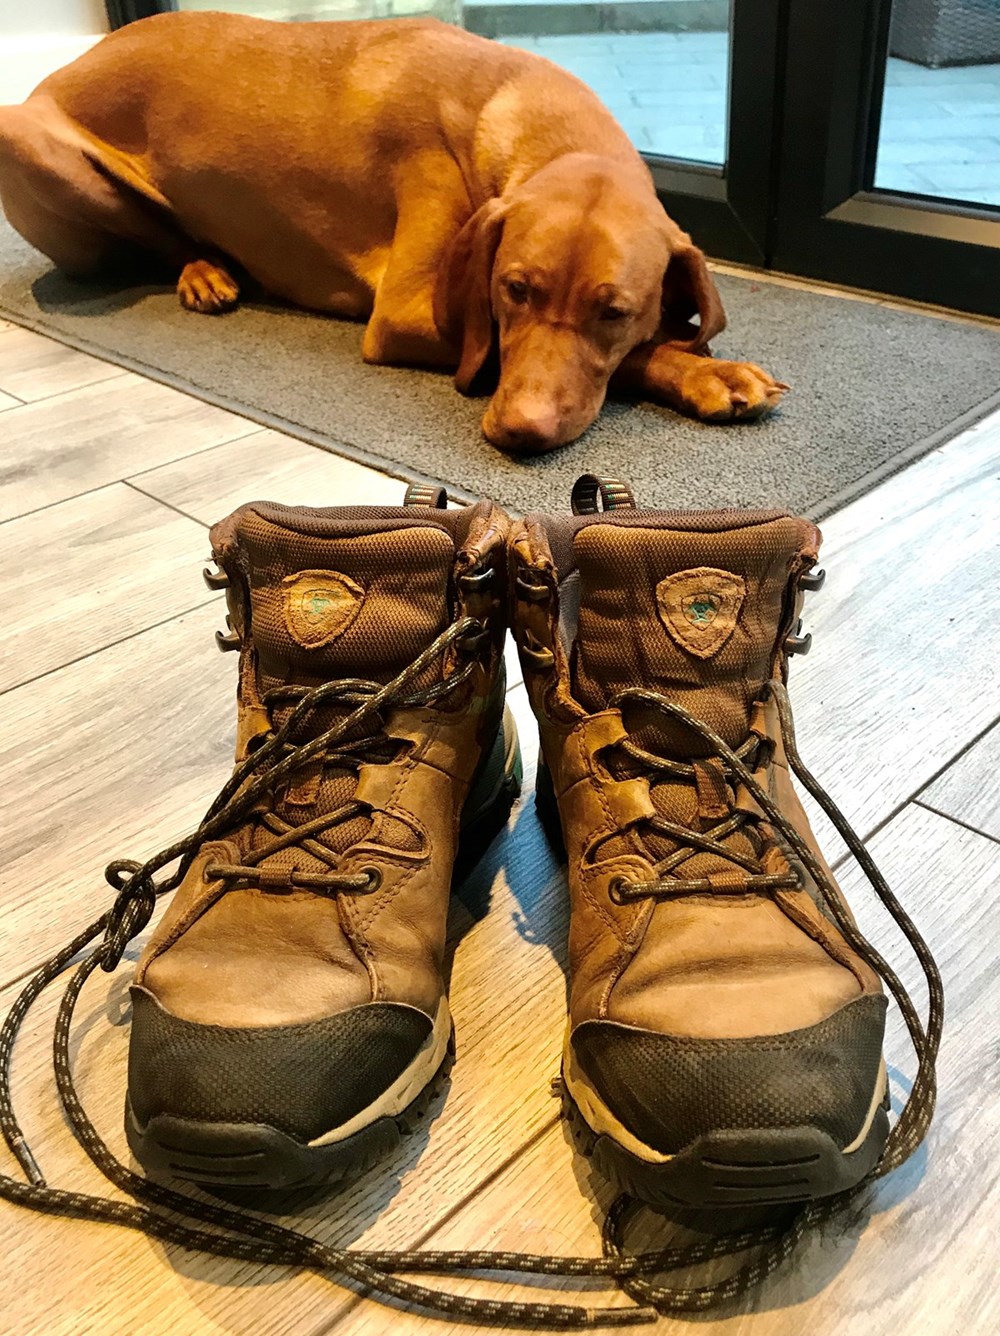 My happy shoes - my walking boots! 🥾 🥾 